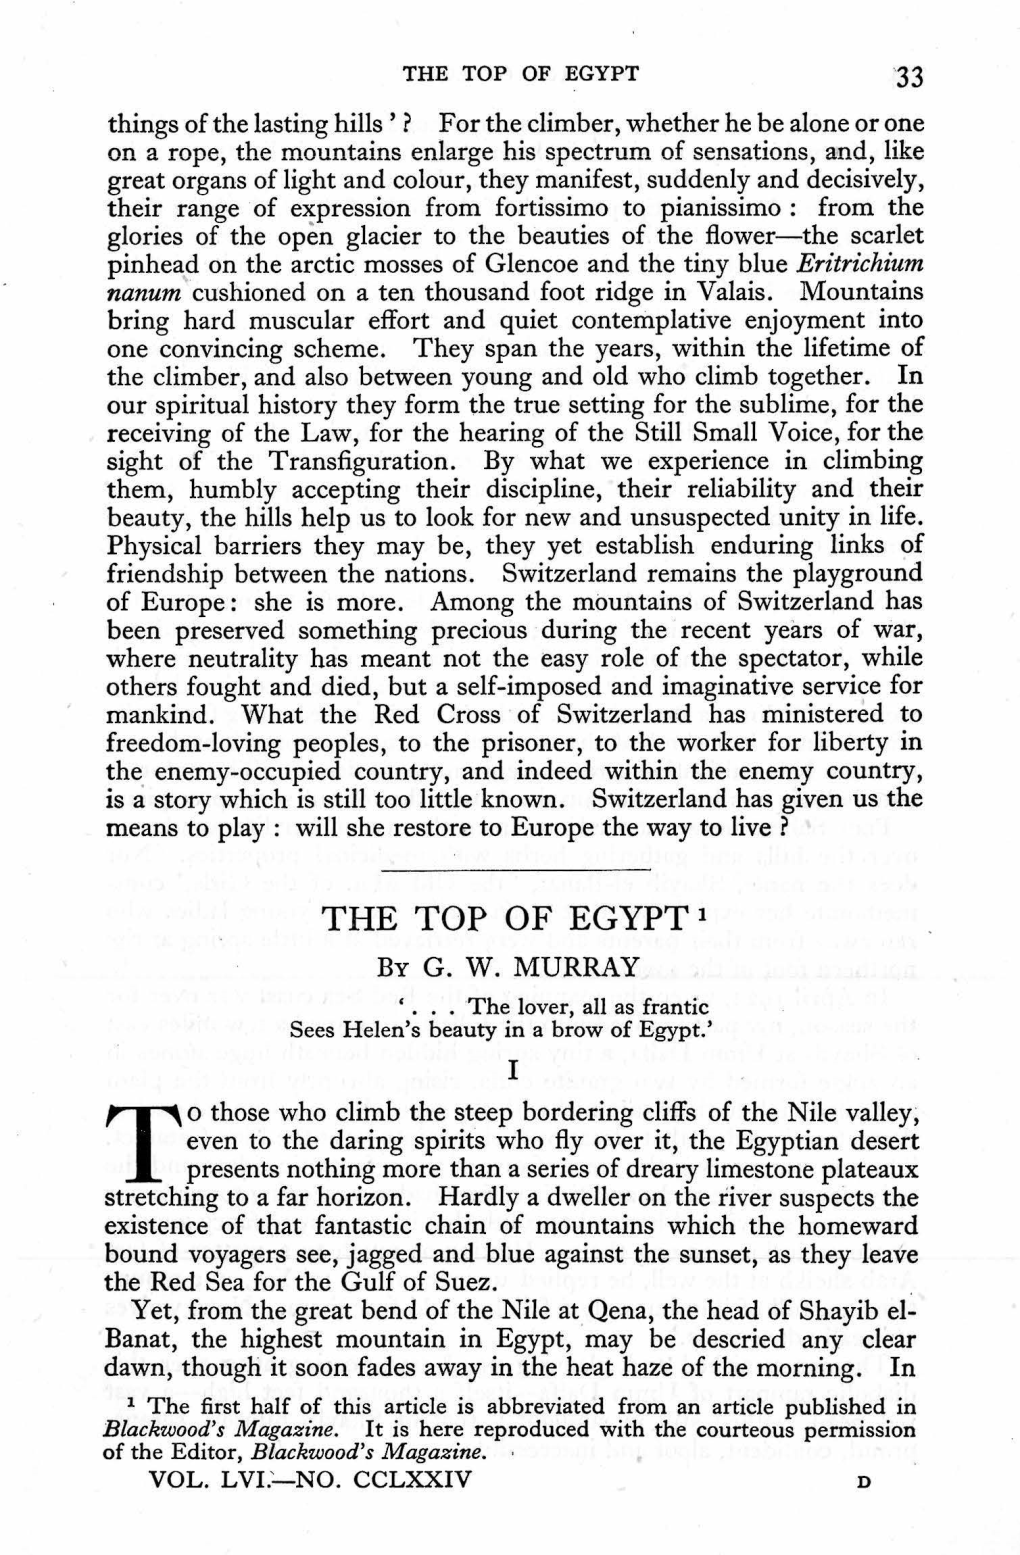 THE TOP of EGYPT. G. W. Murray